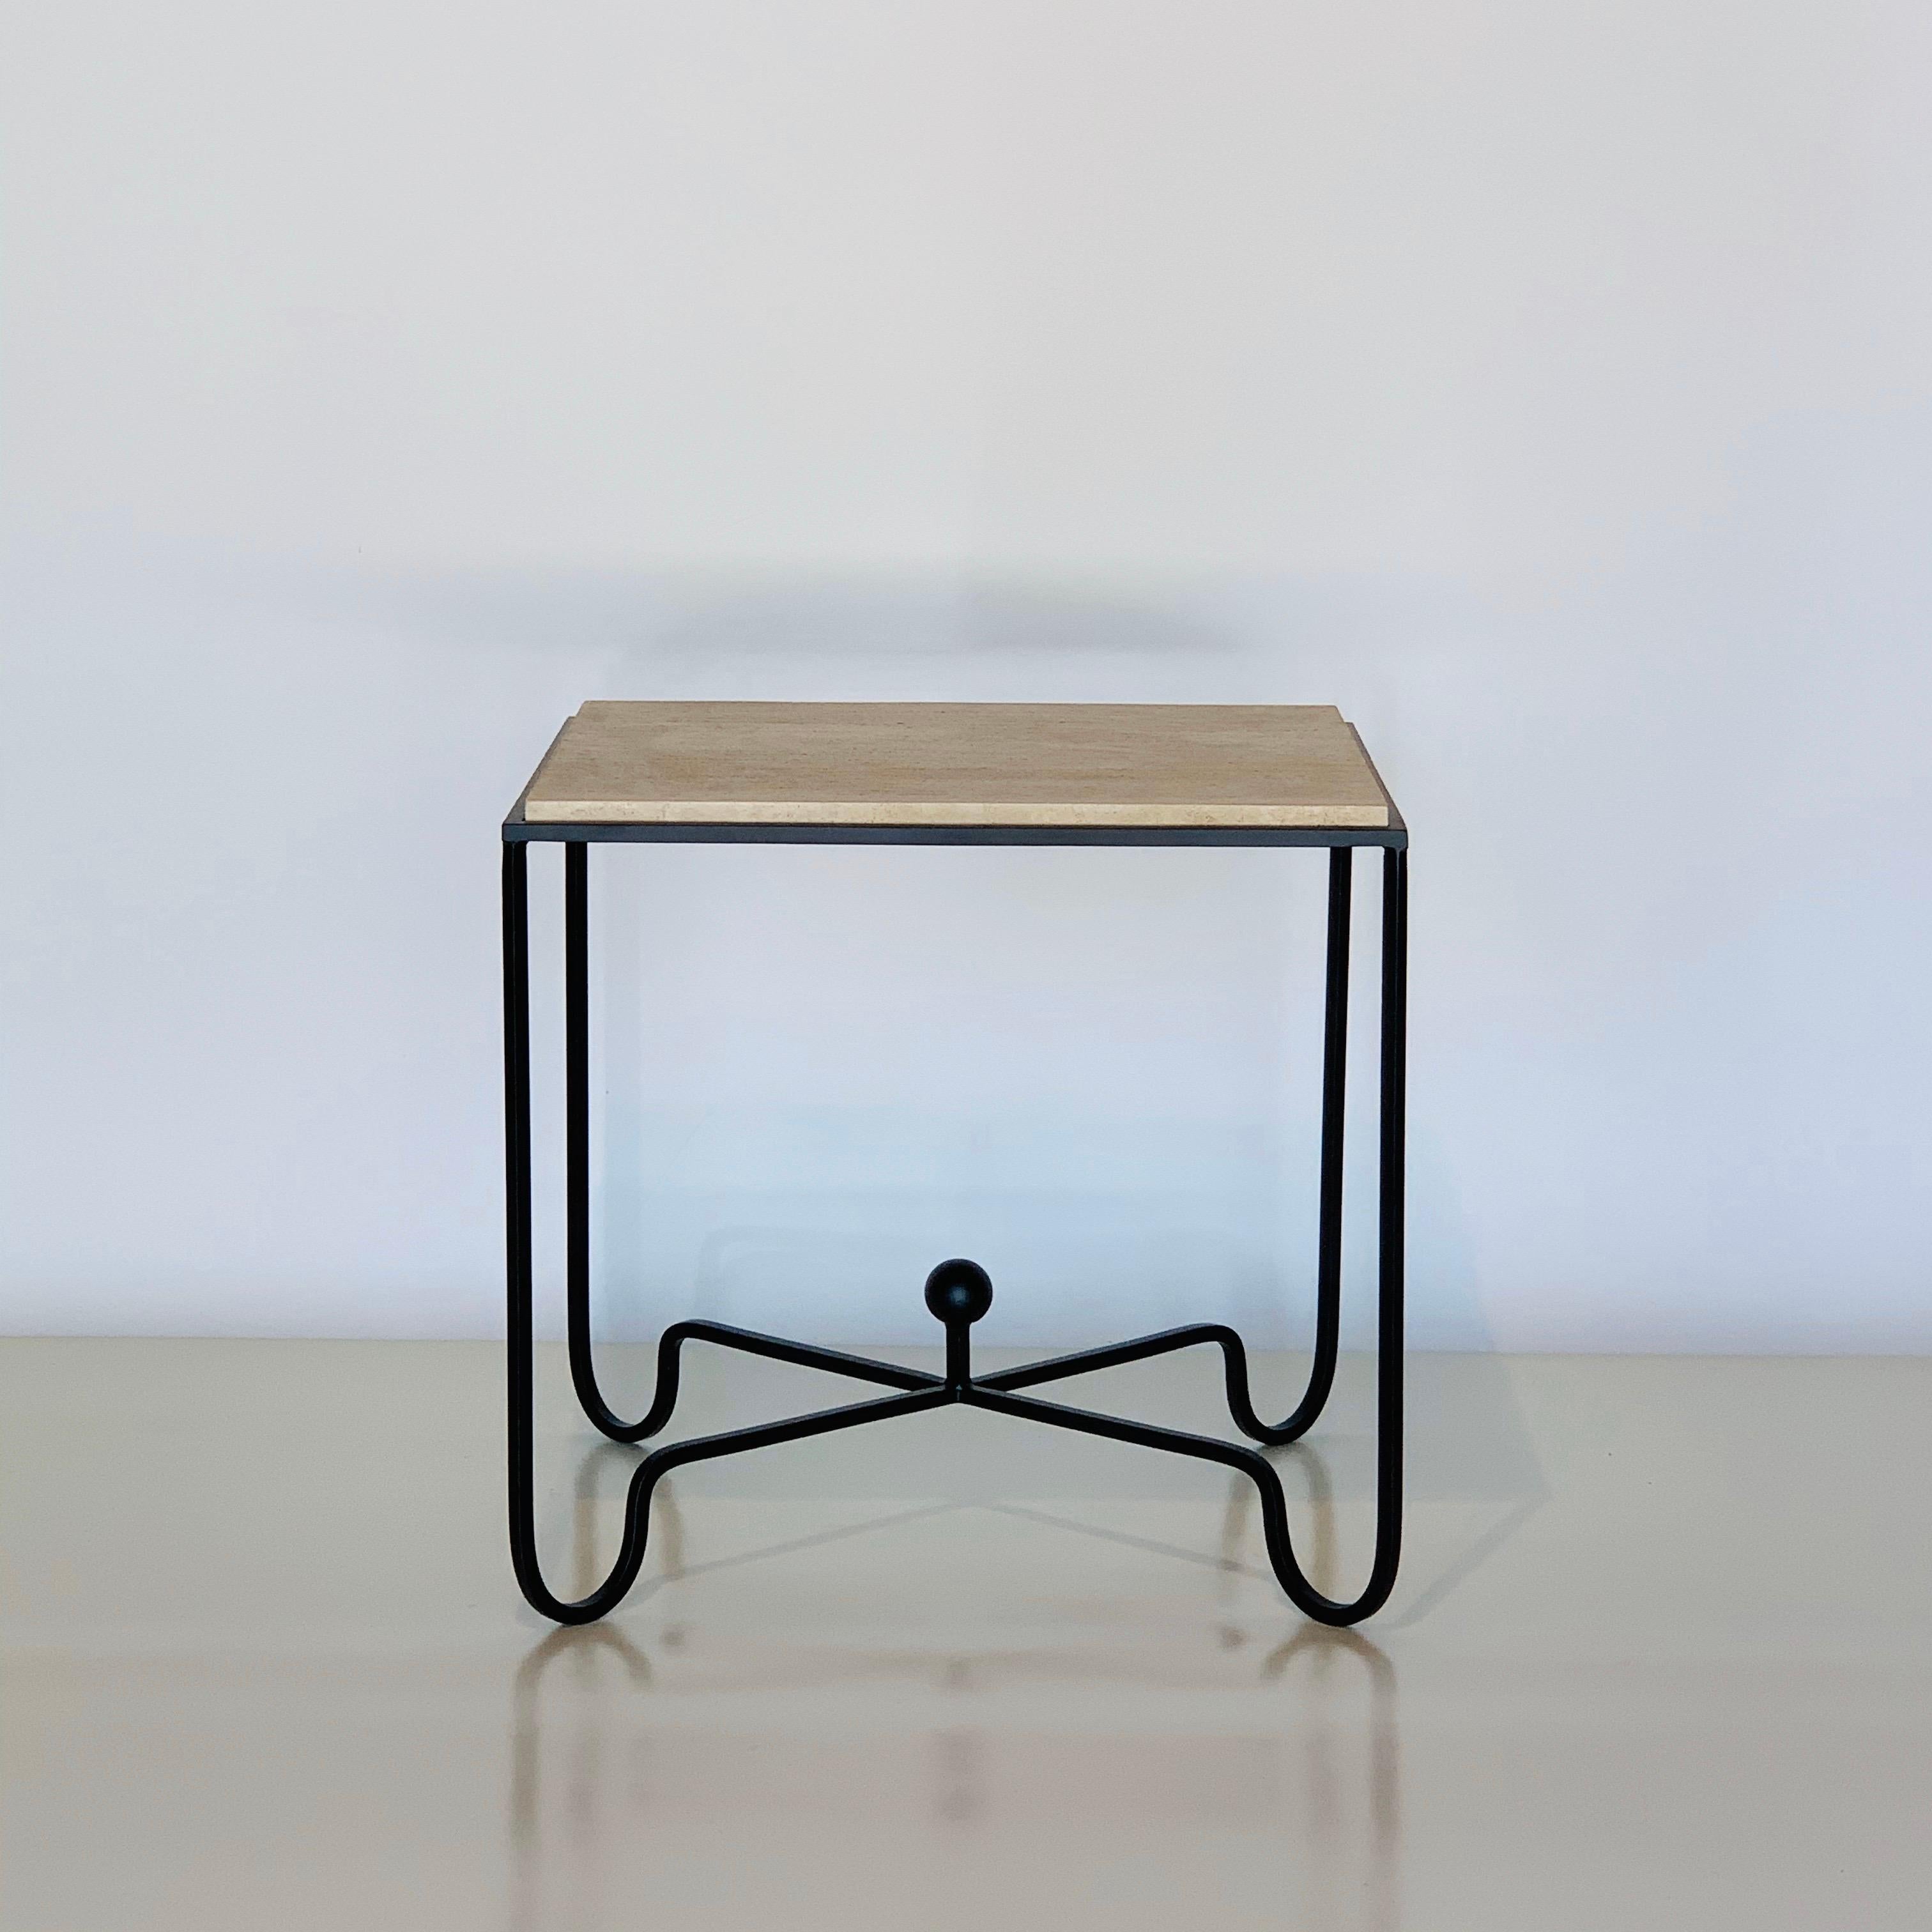 Pair of large ‘Entretoise’ travertine side tables or nightstands by Design Frères.